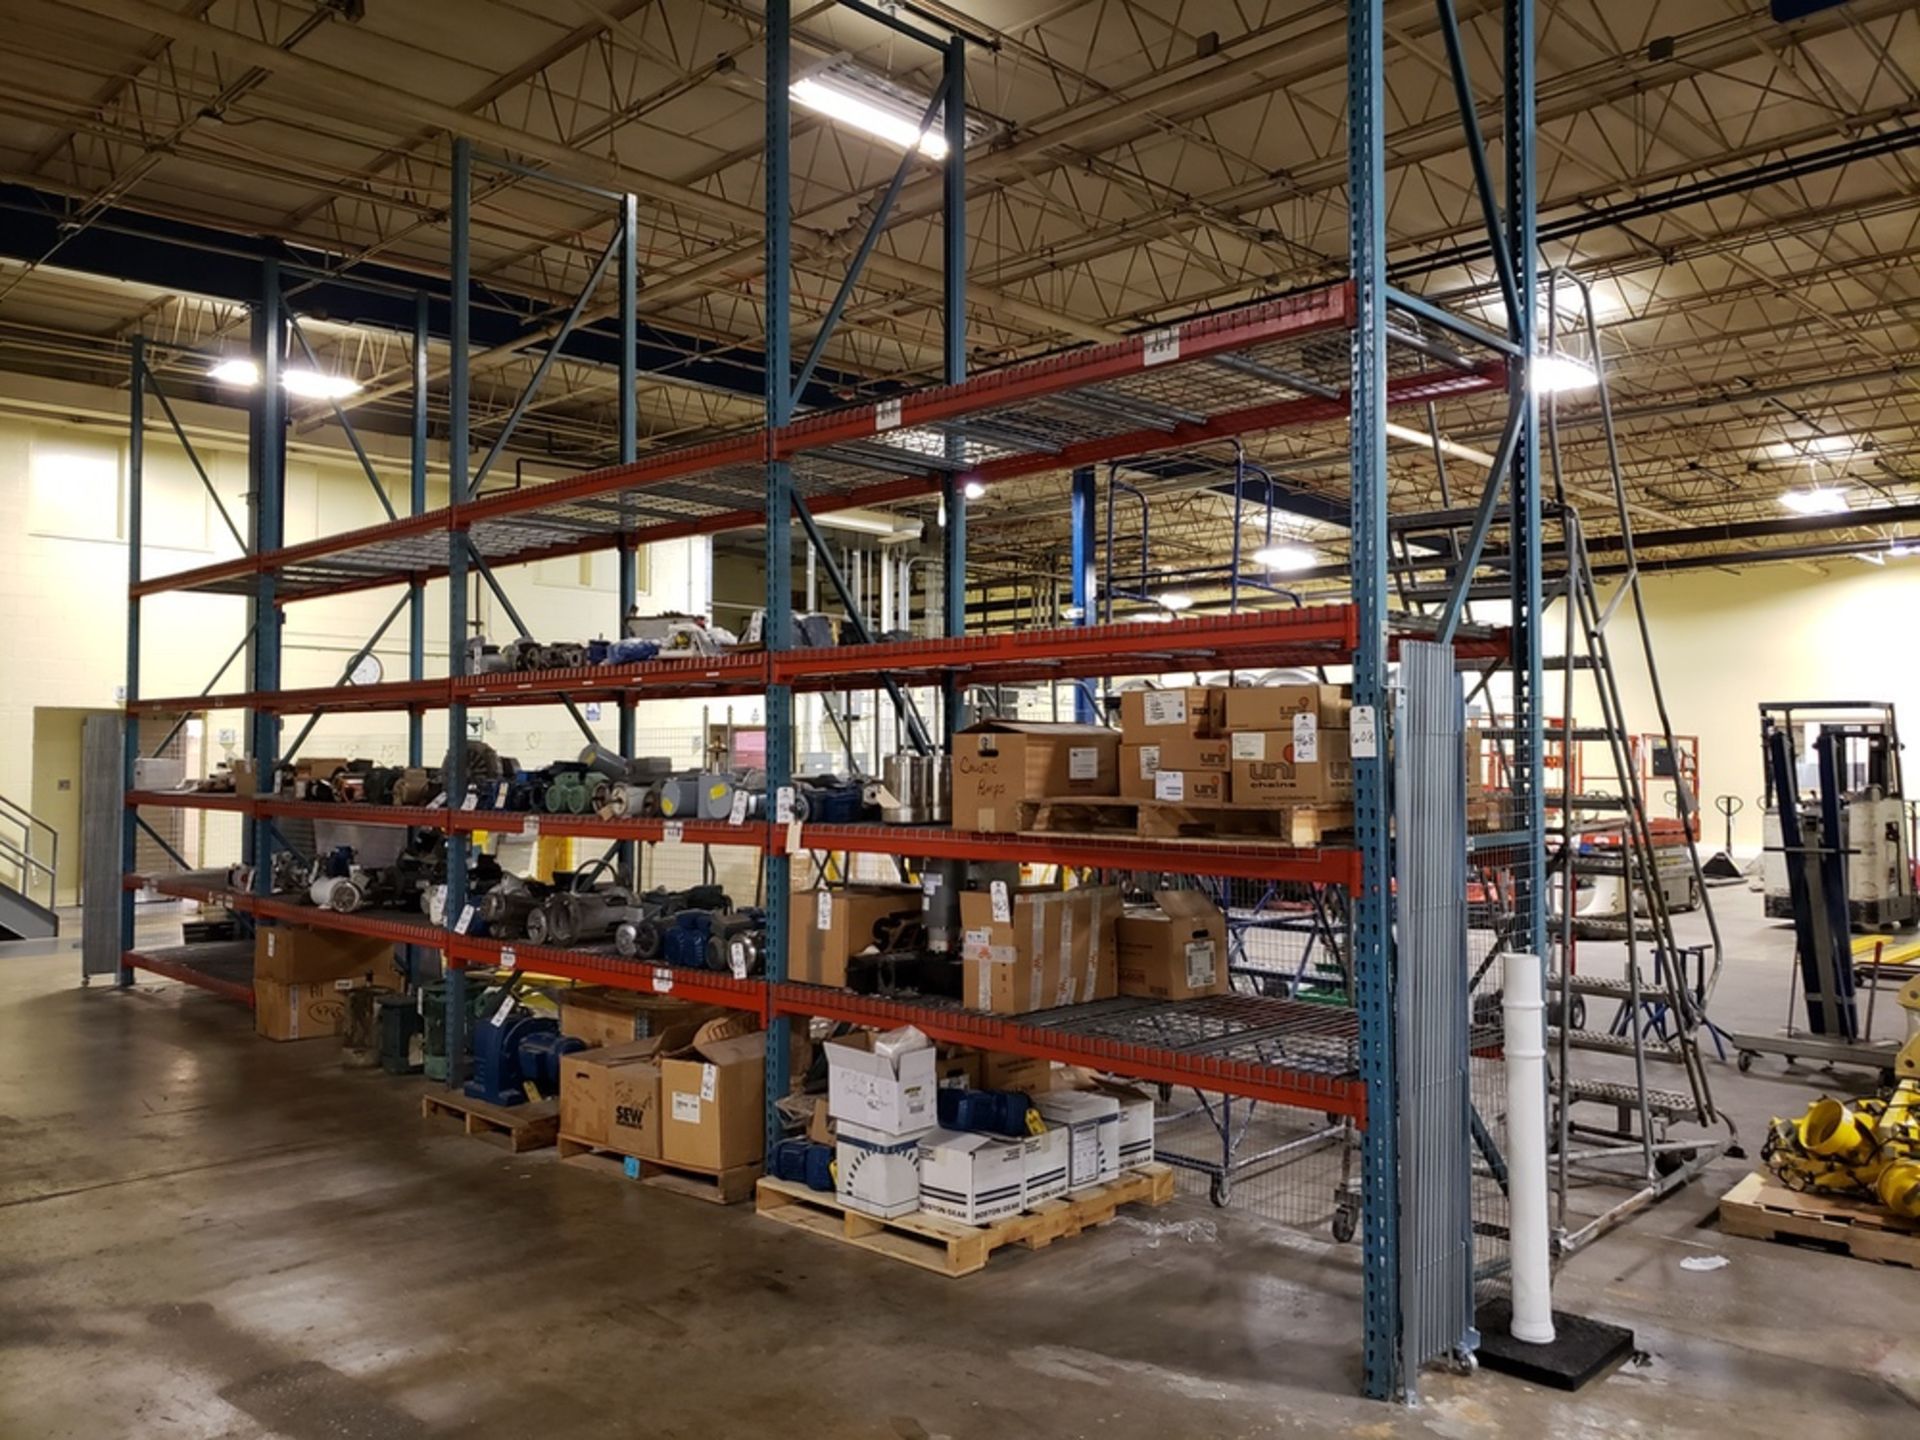 Lot of Pallet Racking, (5) 42" X 16' Uprights, (34) 8' Beams, (34) Wire Shelves | Rig Fee: $300